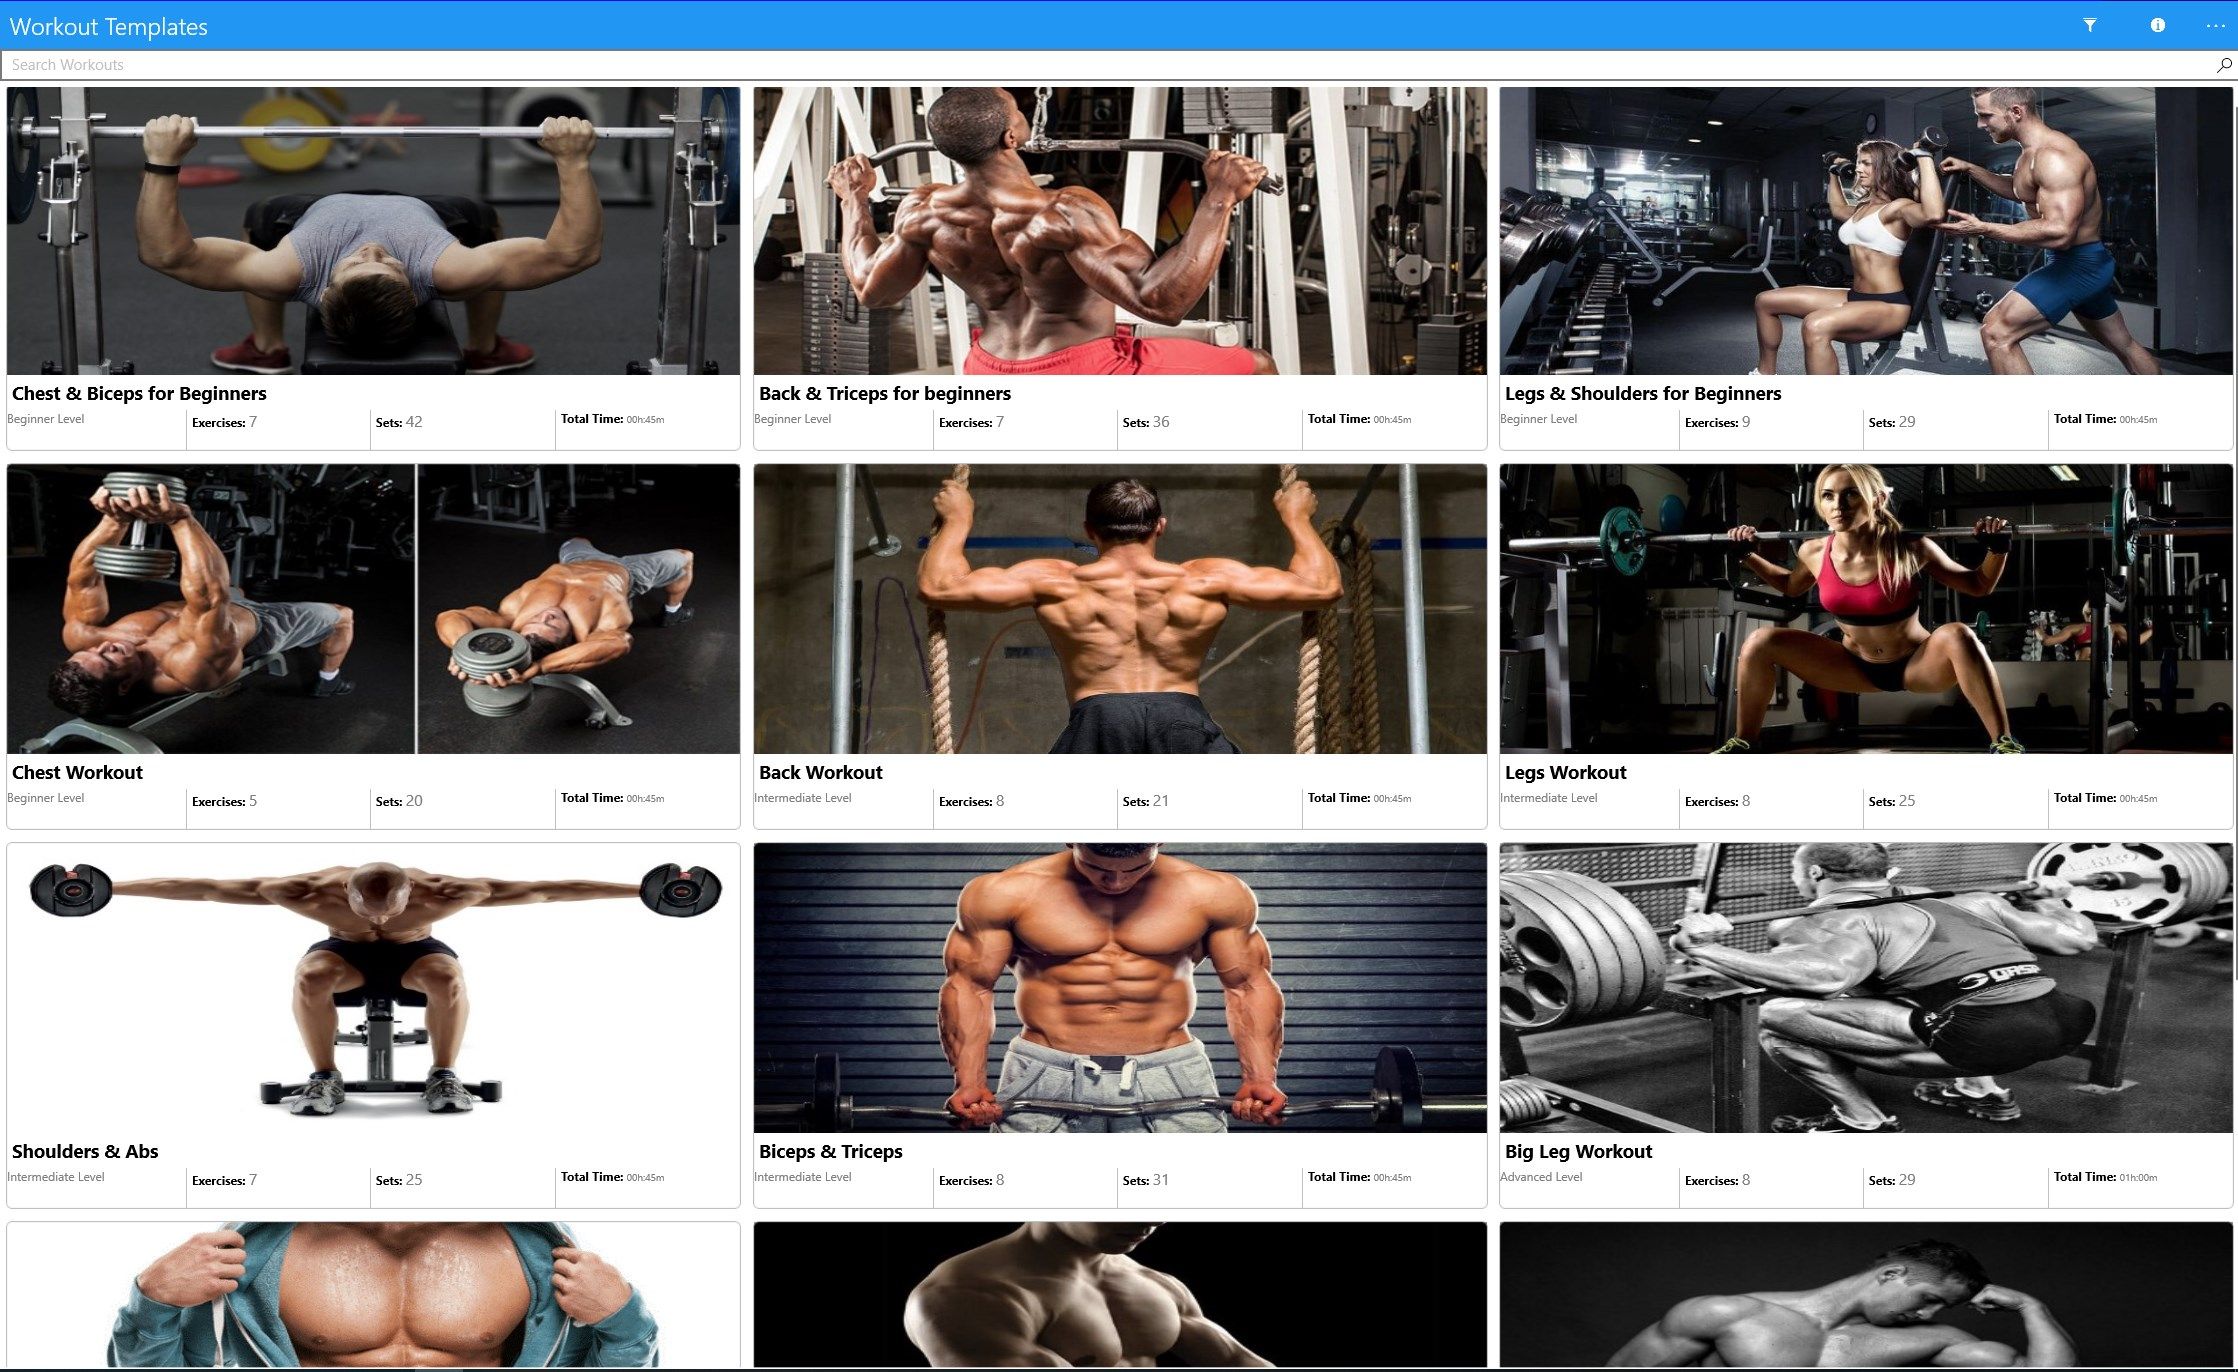 Find Workout Templates and Create your own Workouts